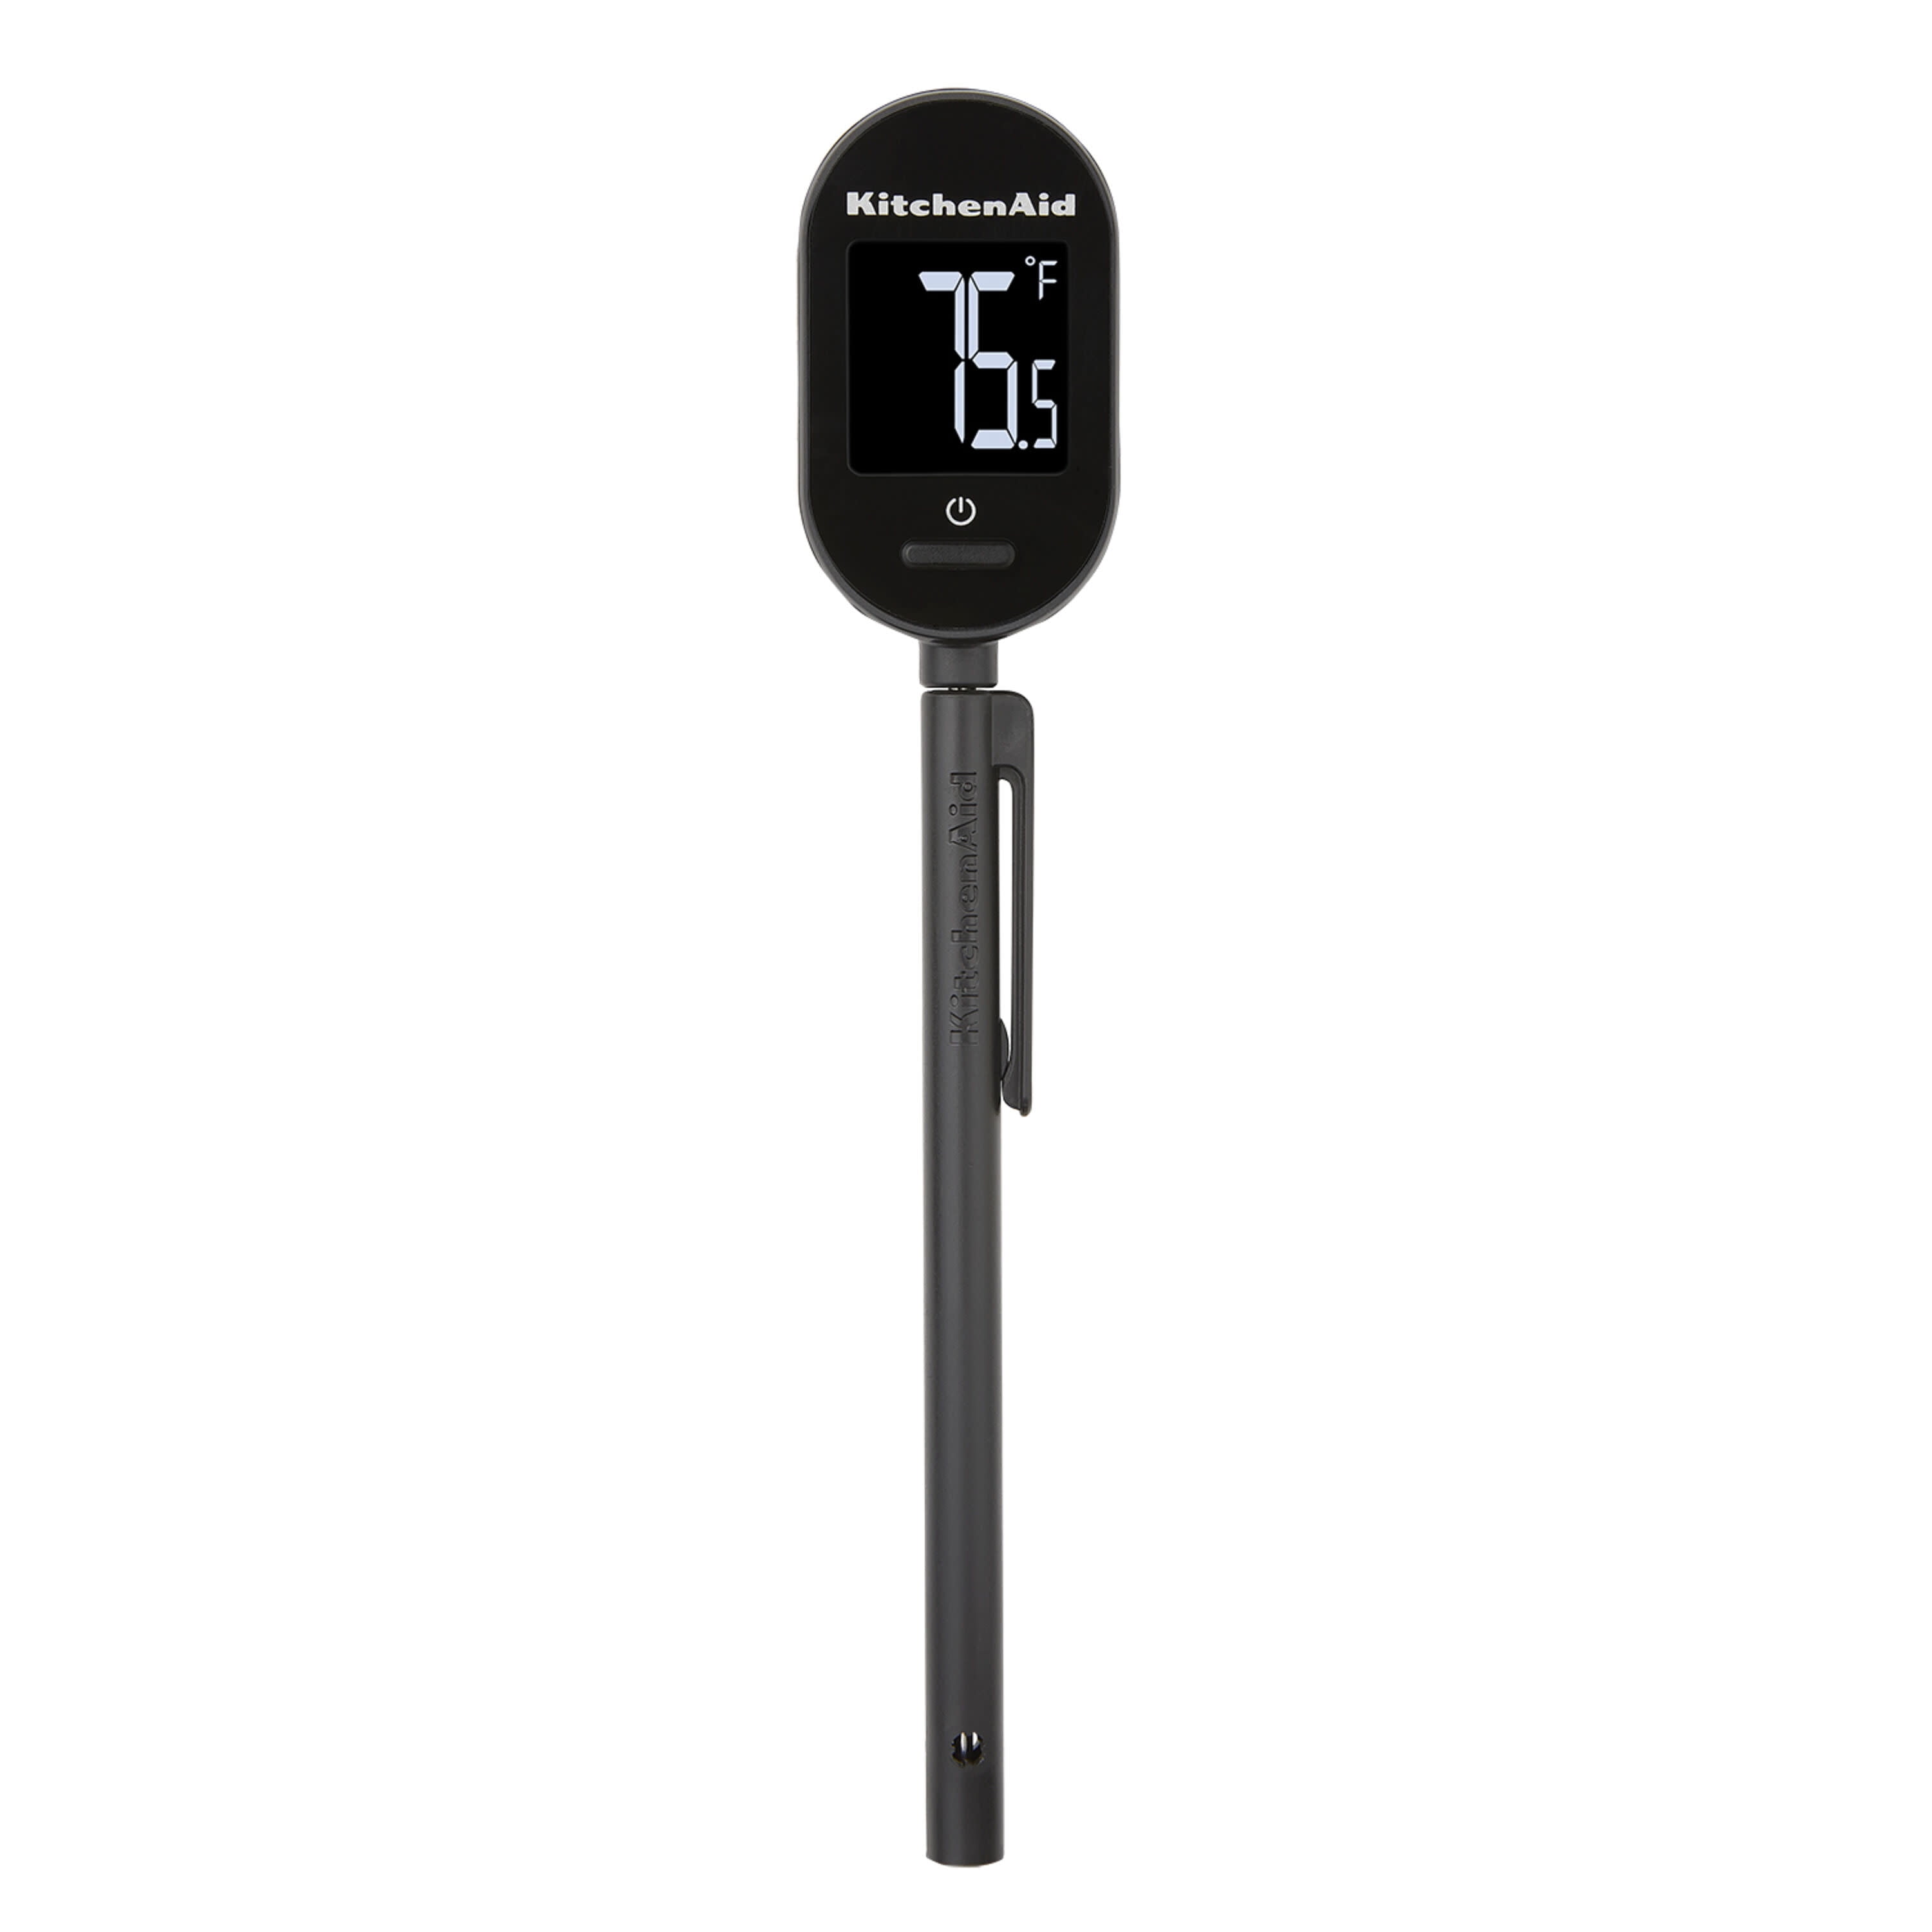 ProThermo Instant Read Digital Meat Thermometer - White Unbranded